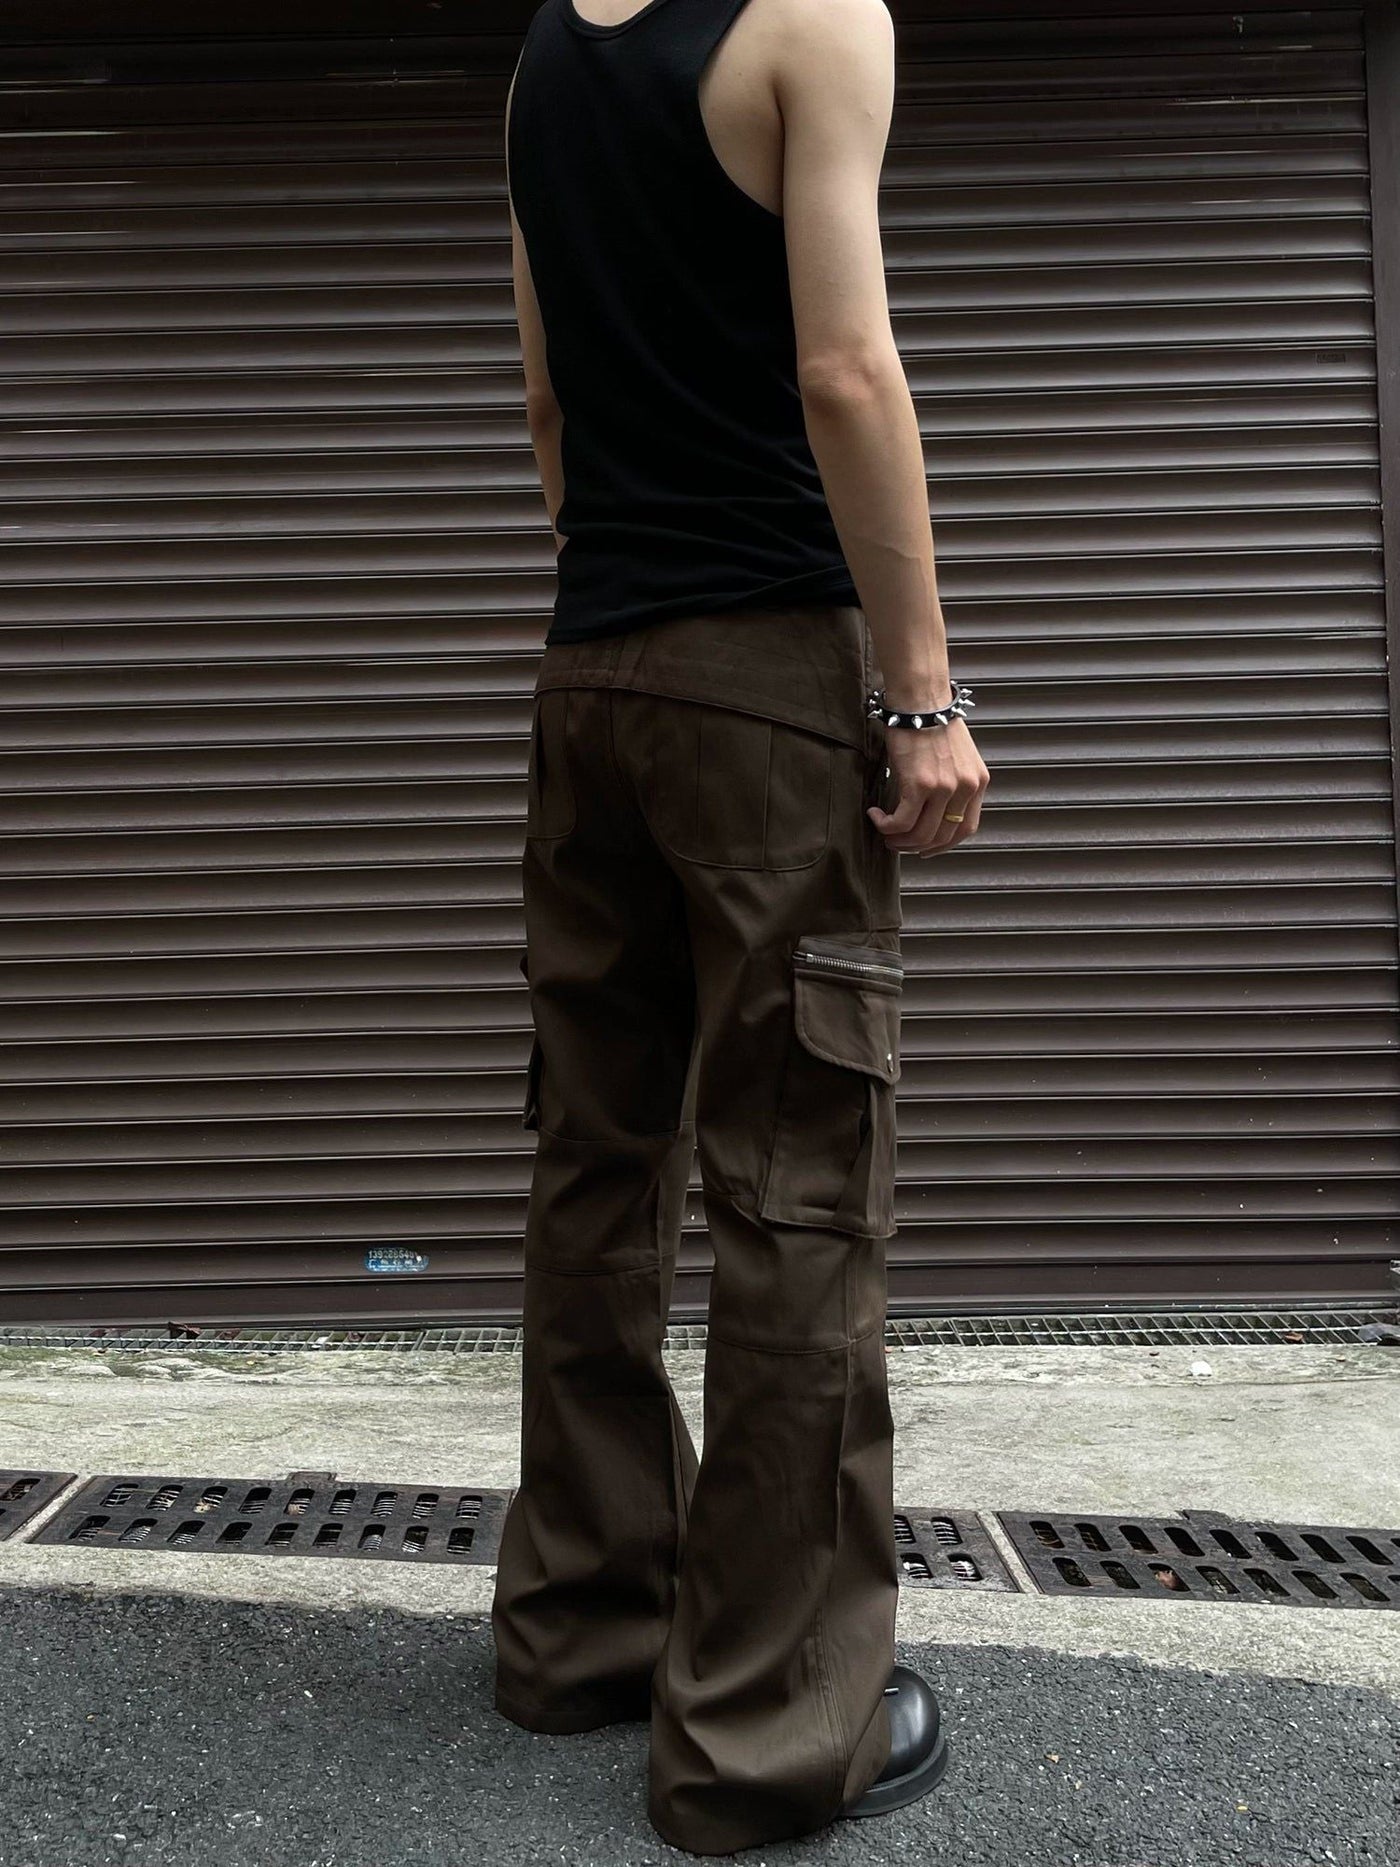 Straight Leg Flared Cargo Pants Korean Street Fashion Pants By MaxDstr Shop Online at OH Vault